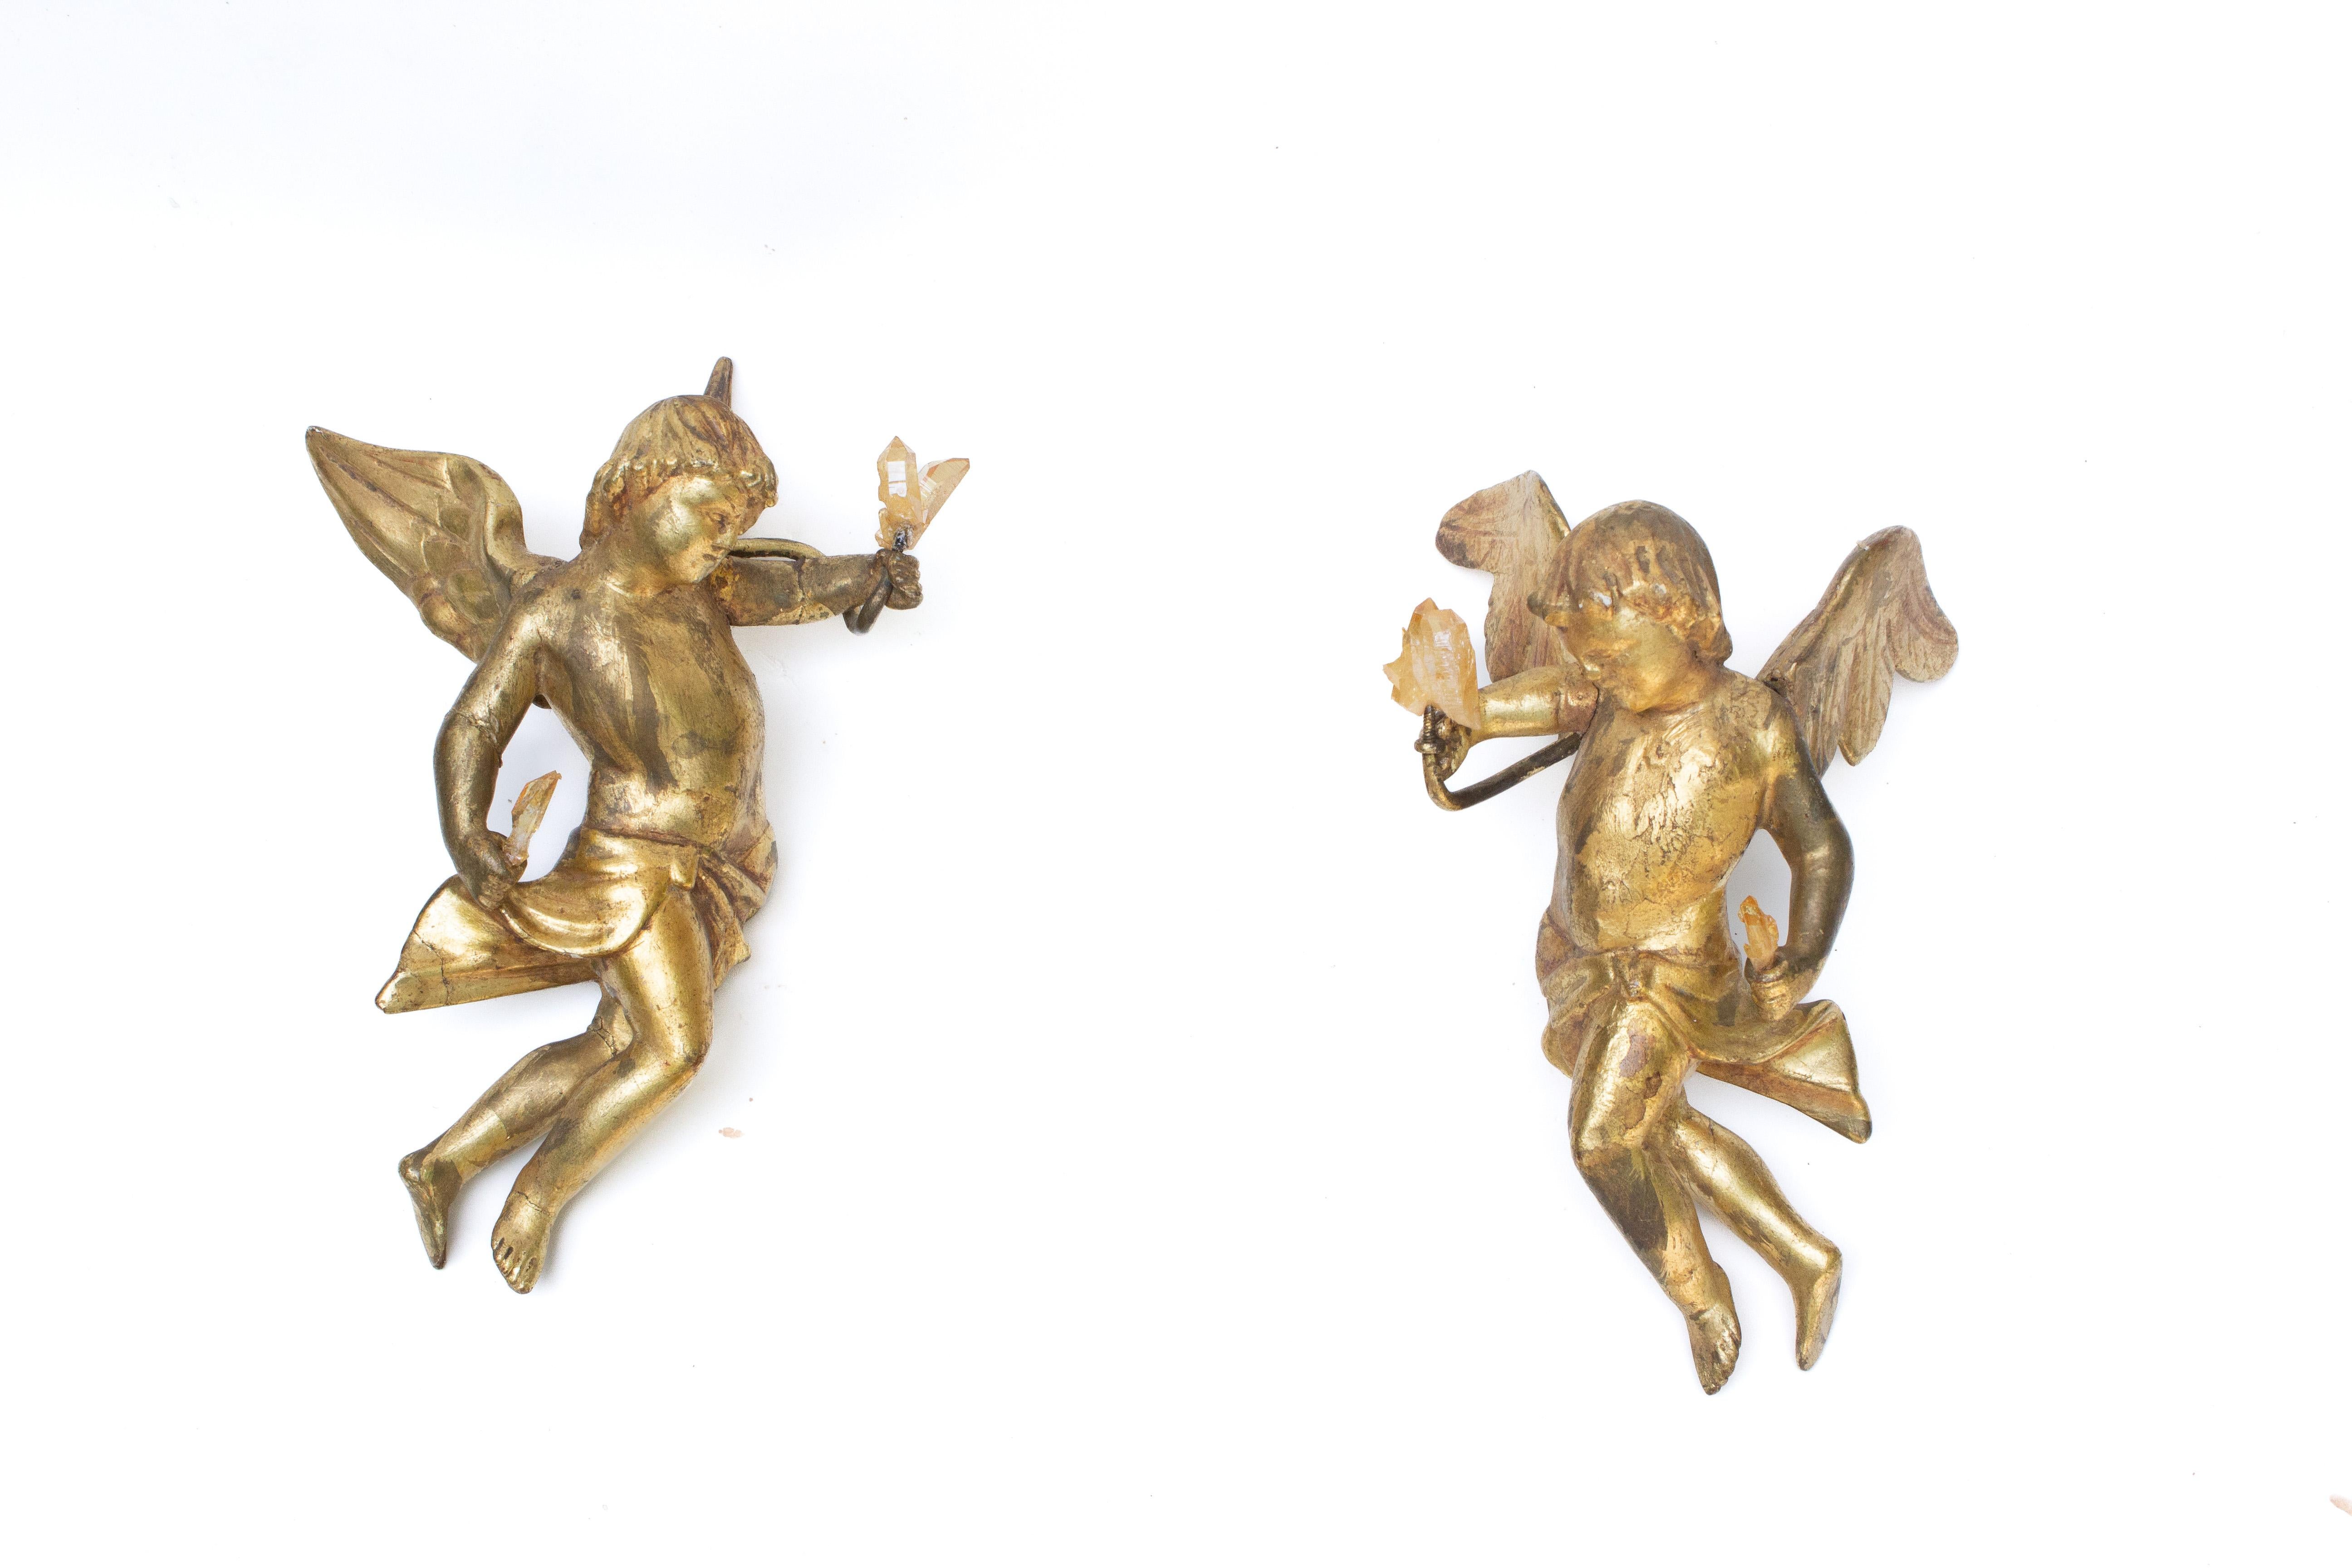 Rococo Pair of 18th Century Italian Gilded Angels with Golden Quartz Crystals 